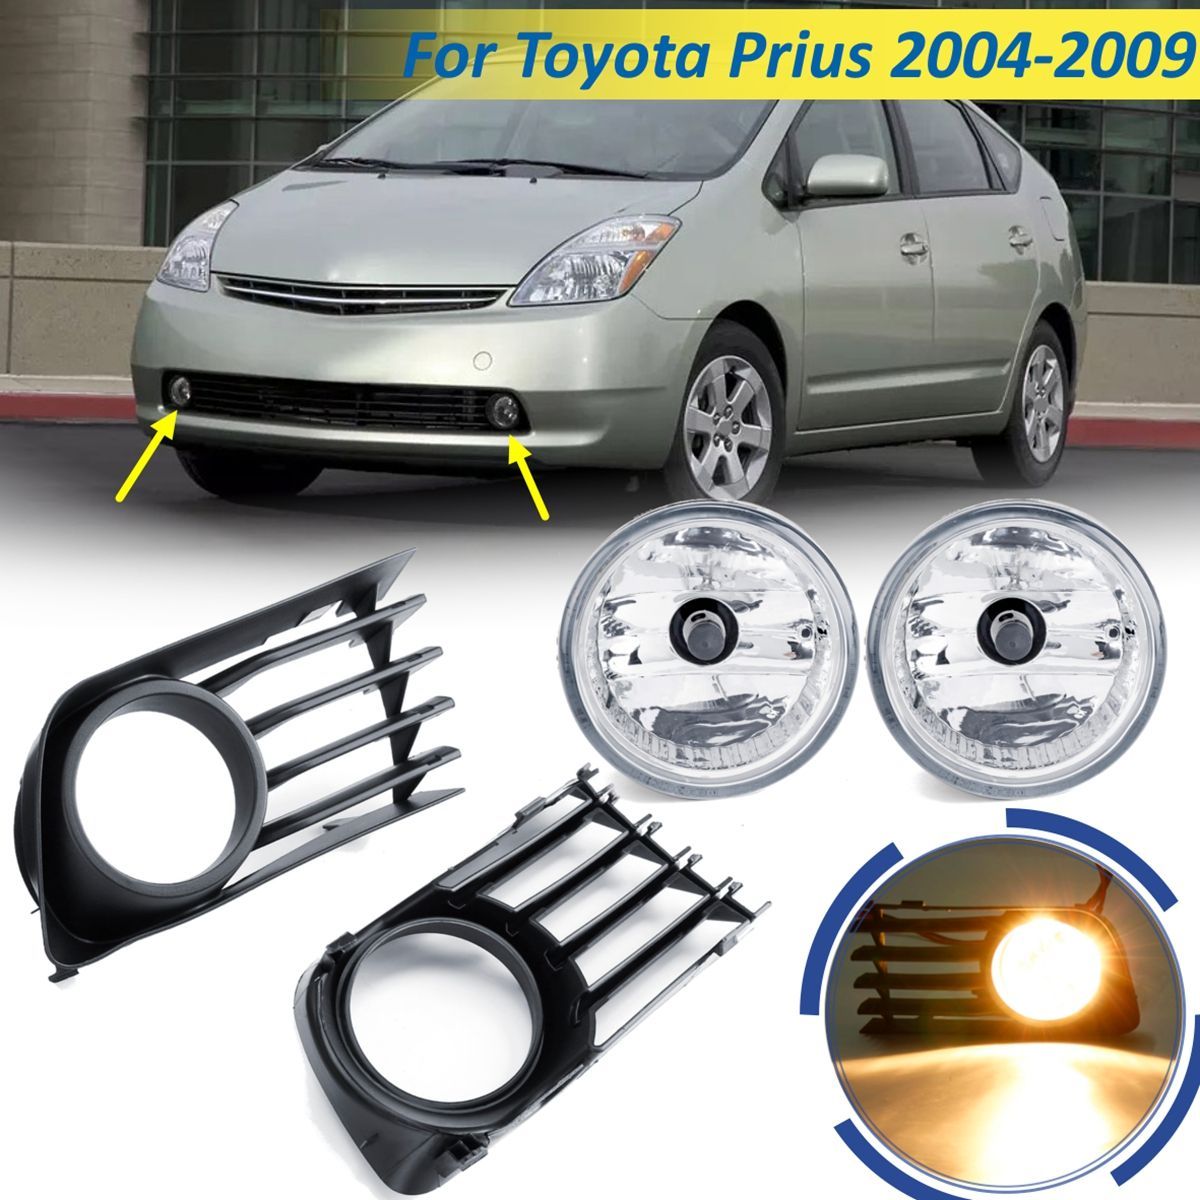 Car-Front-Bumper-Fog-Lights-Lamps-with-Covers-Pair-For-Toyota-Prius-2004-2009-1548750